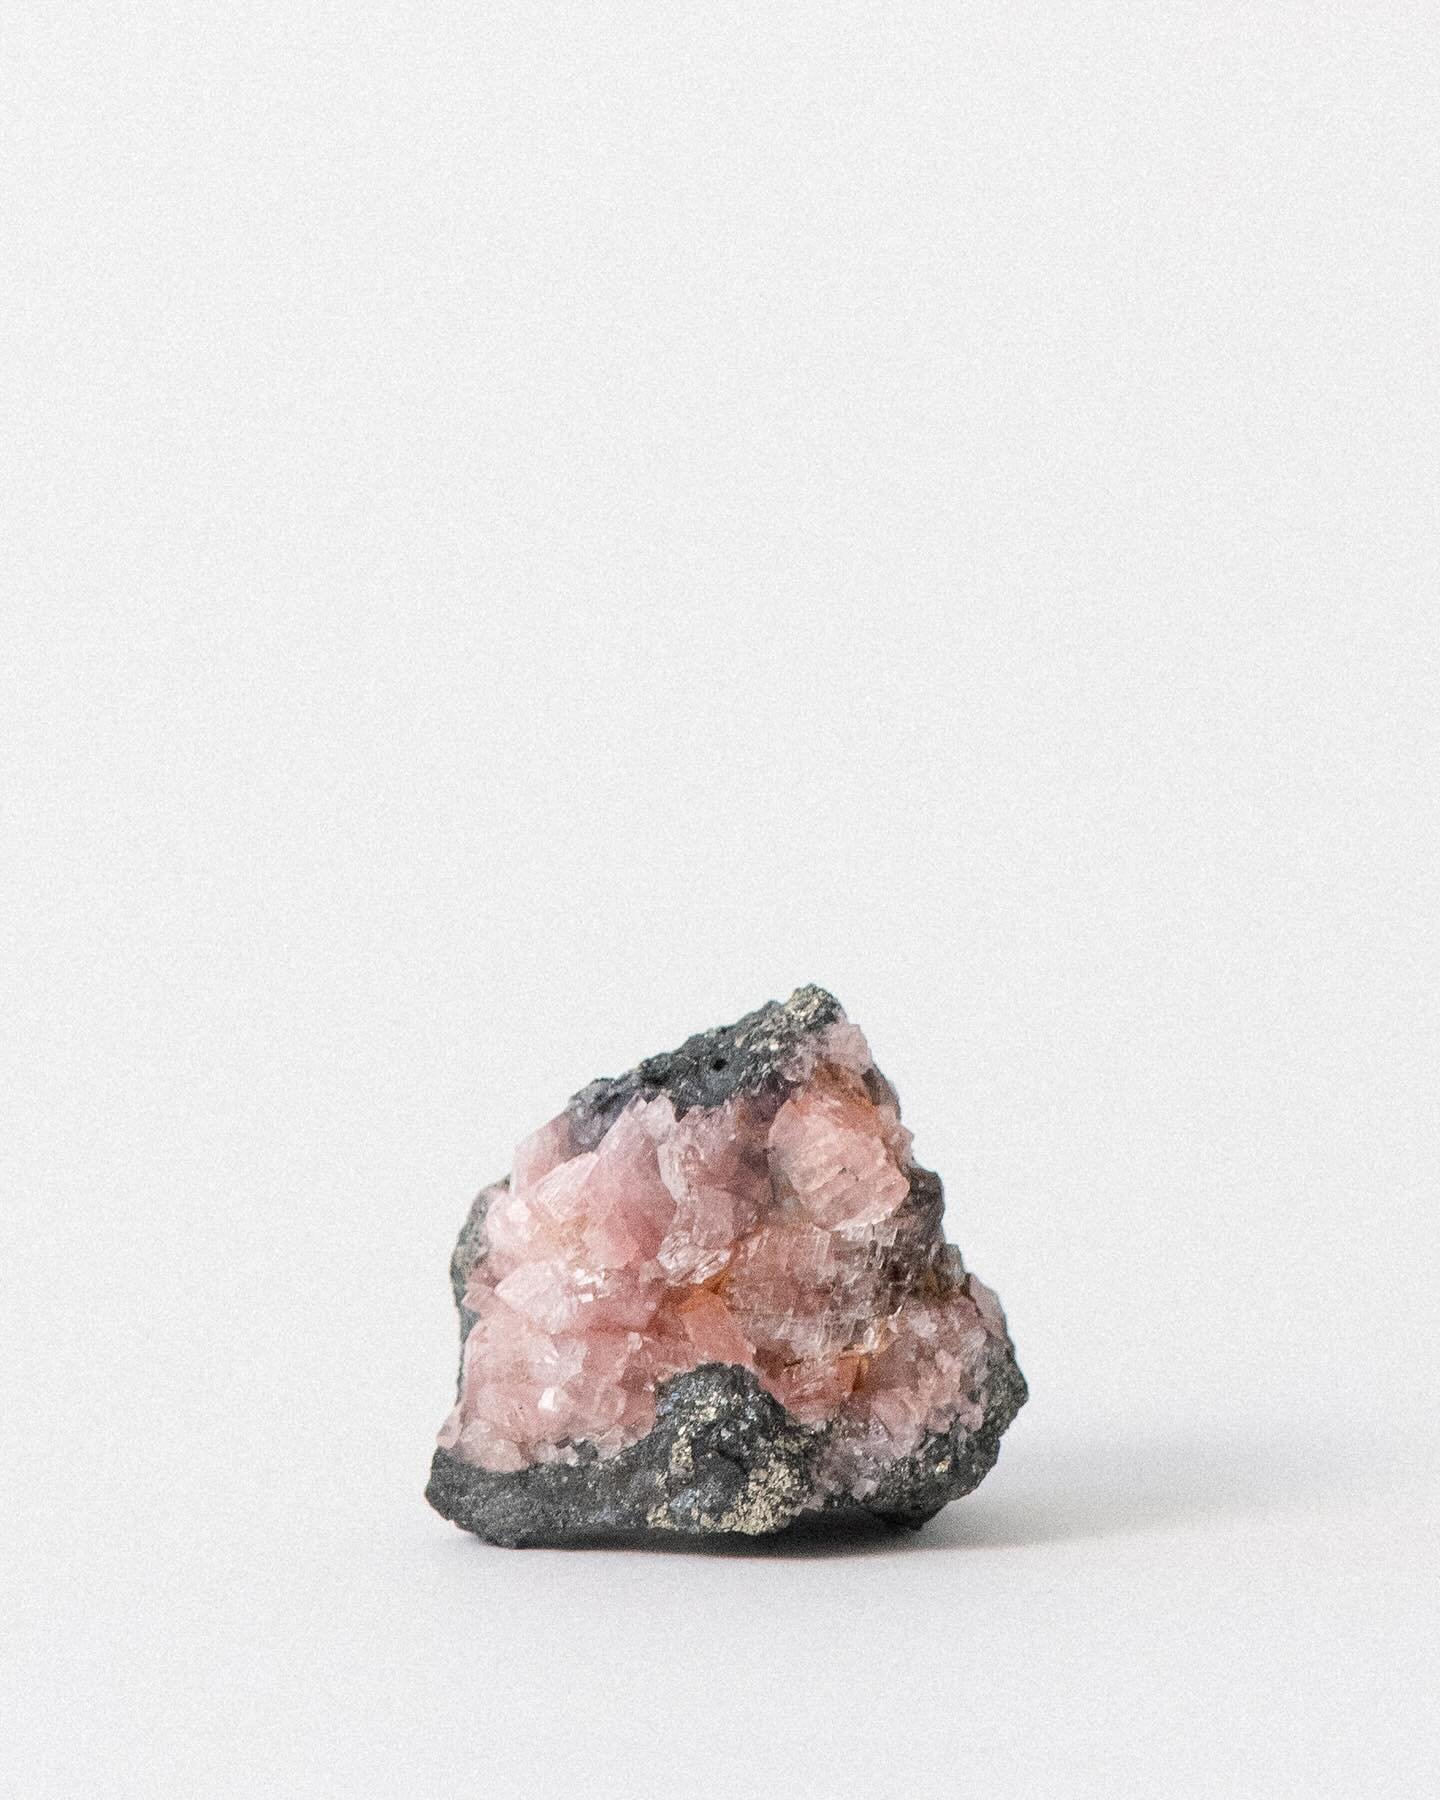 In the Shop &mdash; New Crystals like this vintage Cobaltian Smithsonite from the Tsumeb Mine, Tsumeb Otjikoto Region, Namibia, Africa.

Tsumeb will always be known as one of the premier localities in the world for Smithsonite specimens. The vast num